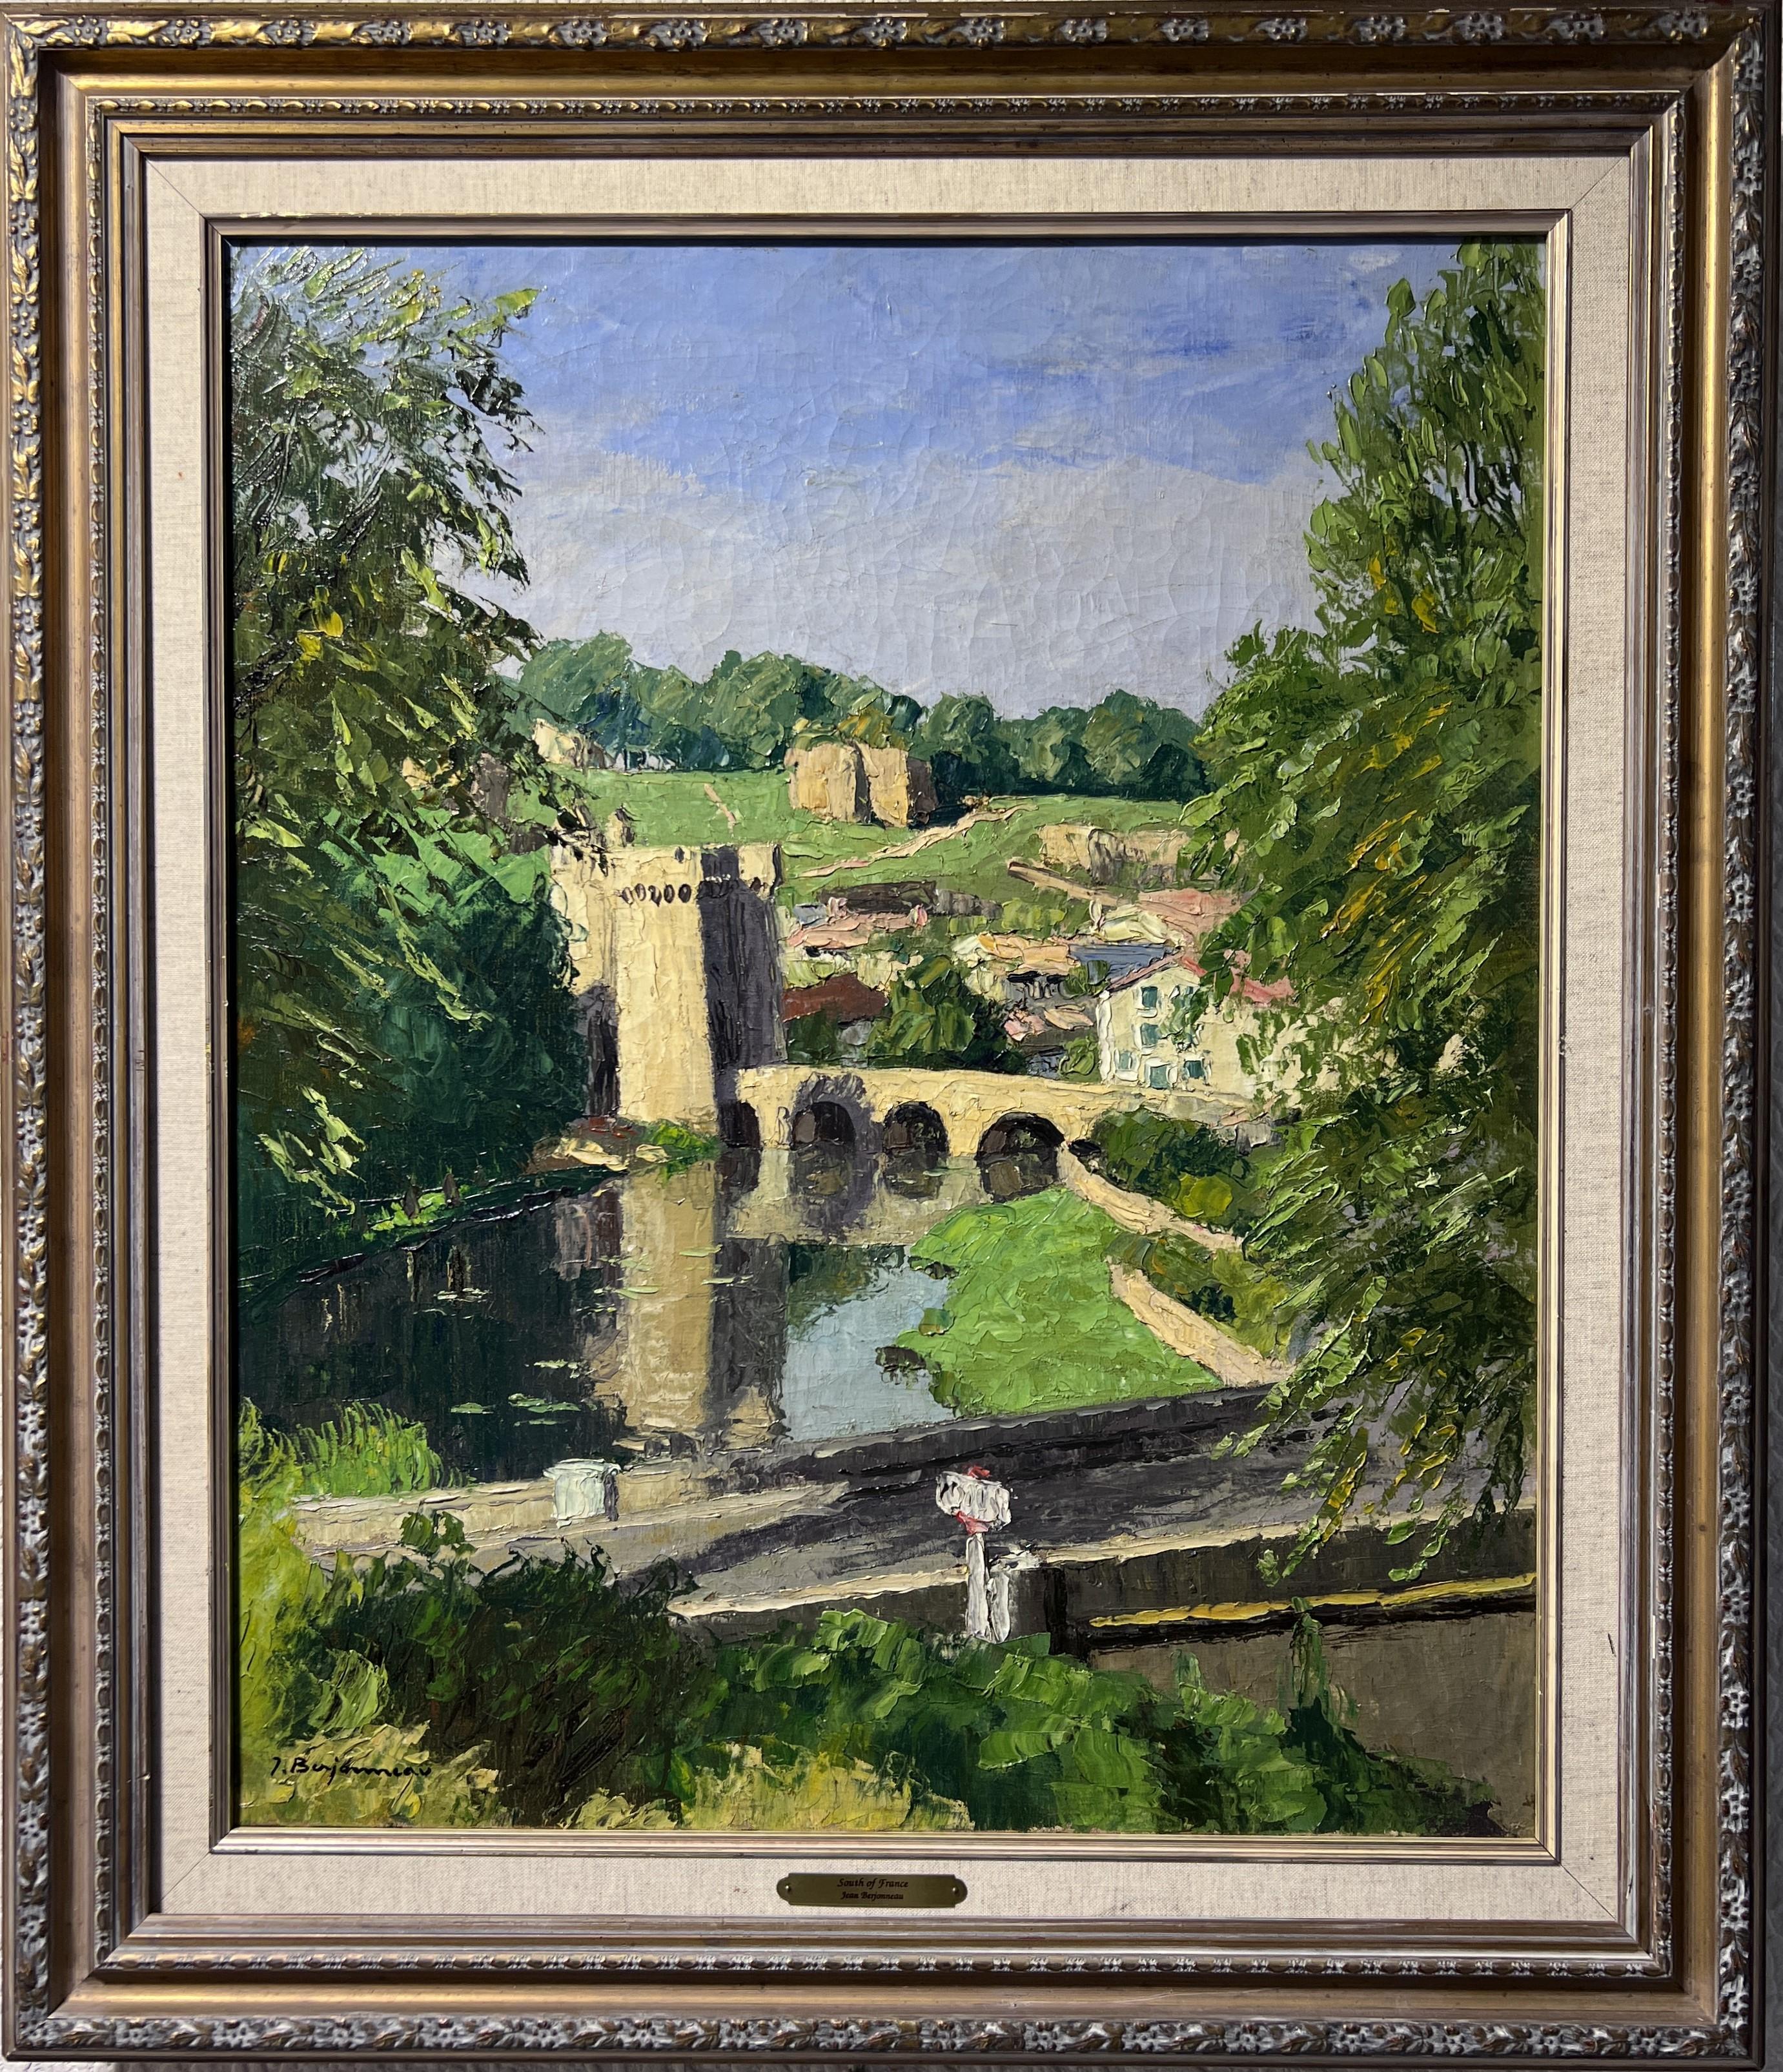 Up for sale is this original antique oil painting on canvas depicting a beautiful landscape titled "South of France". 

Signed in the lower-left corner by well-known French Artist Jehan Berjonneau.
Nicely framed. The nameplate is in the middle